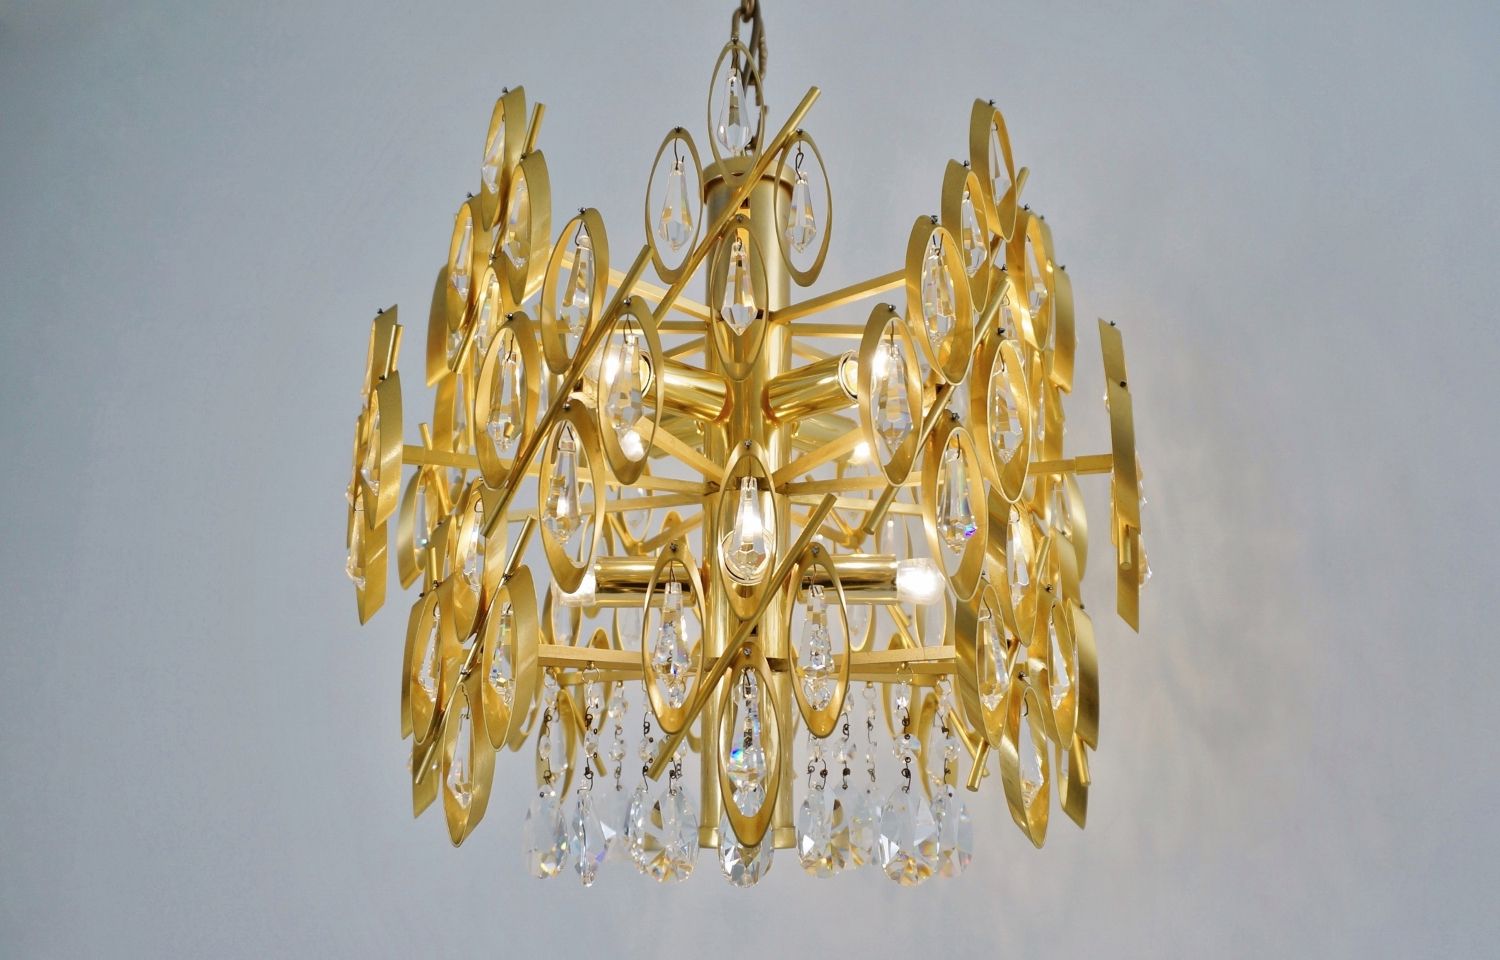 Lobmeyr Chandelier Gold Gilt Metal & Swarovski Crystals Pertaining To Preferred Warm Antique Gold Ring Chandeliers (View 9 of 20)